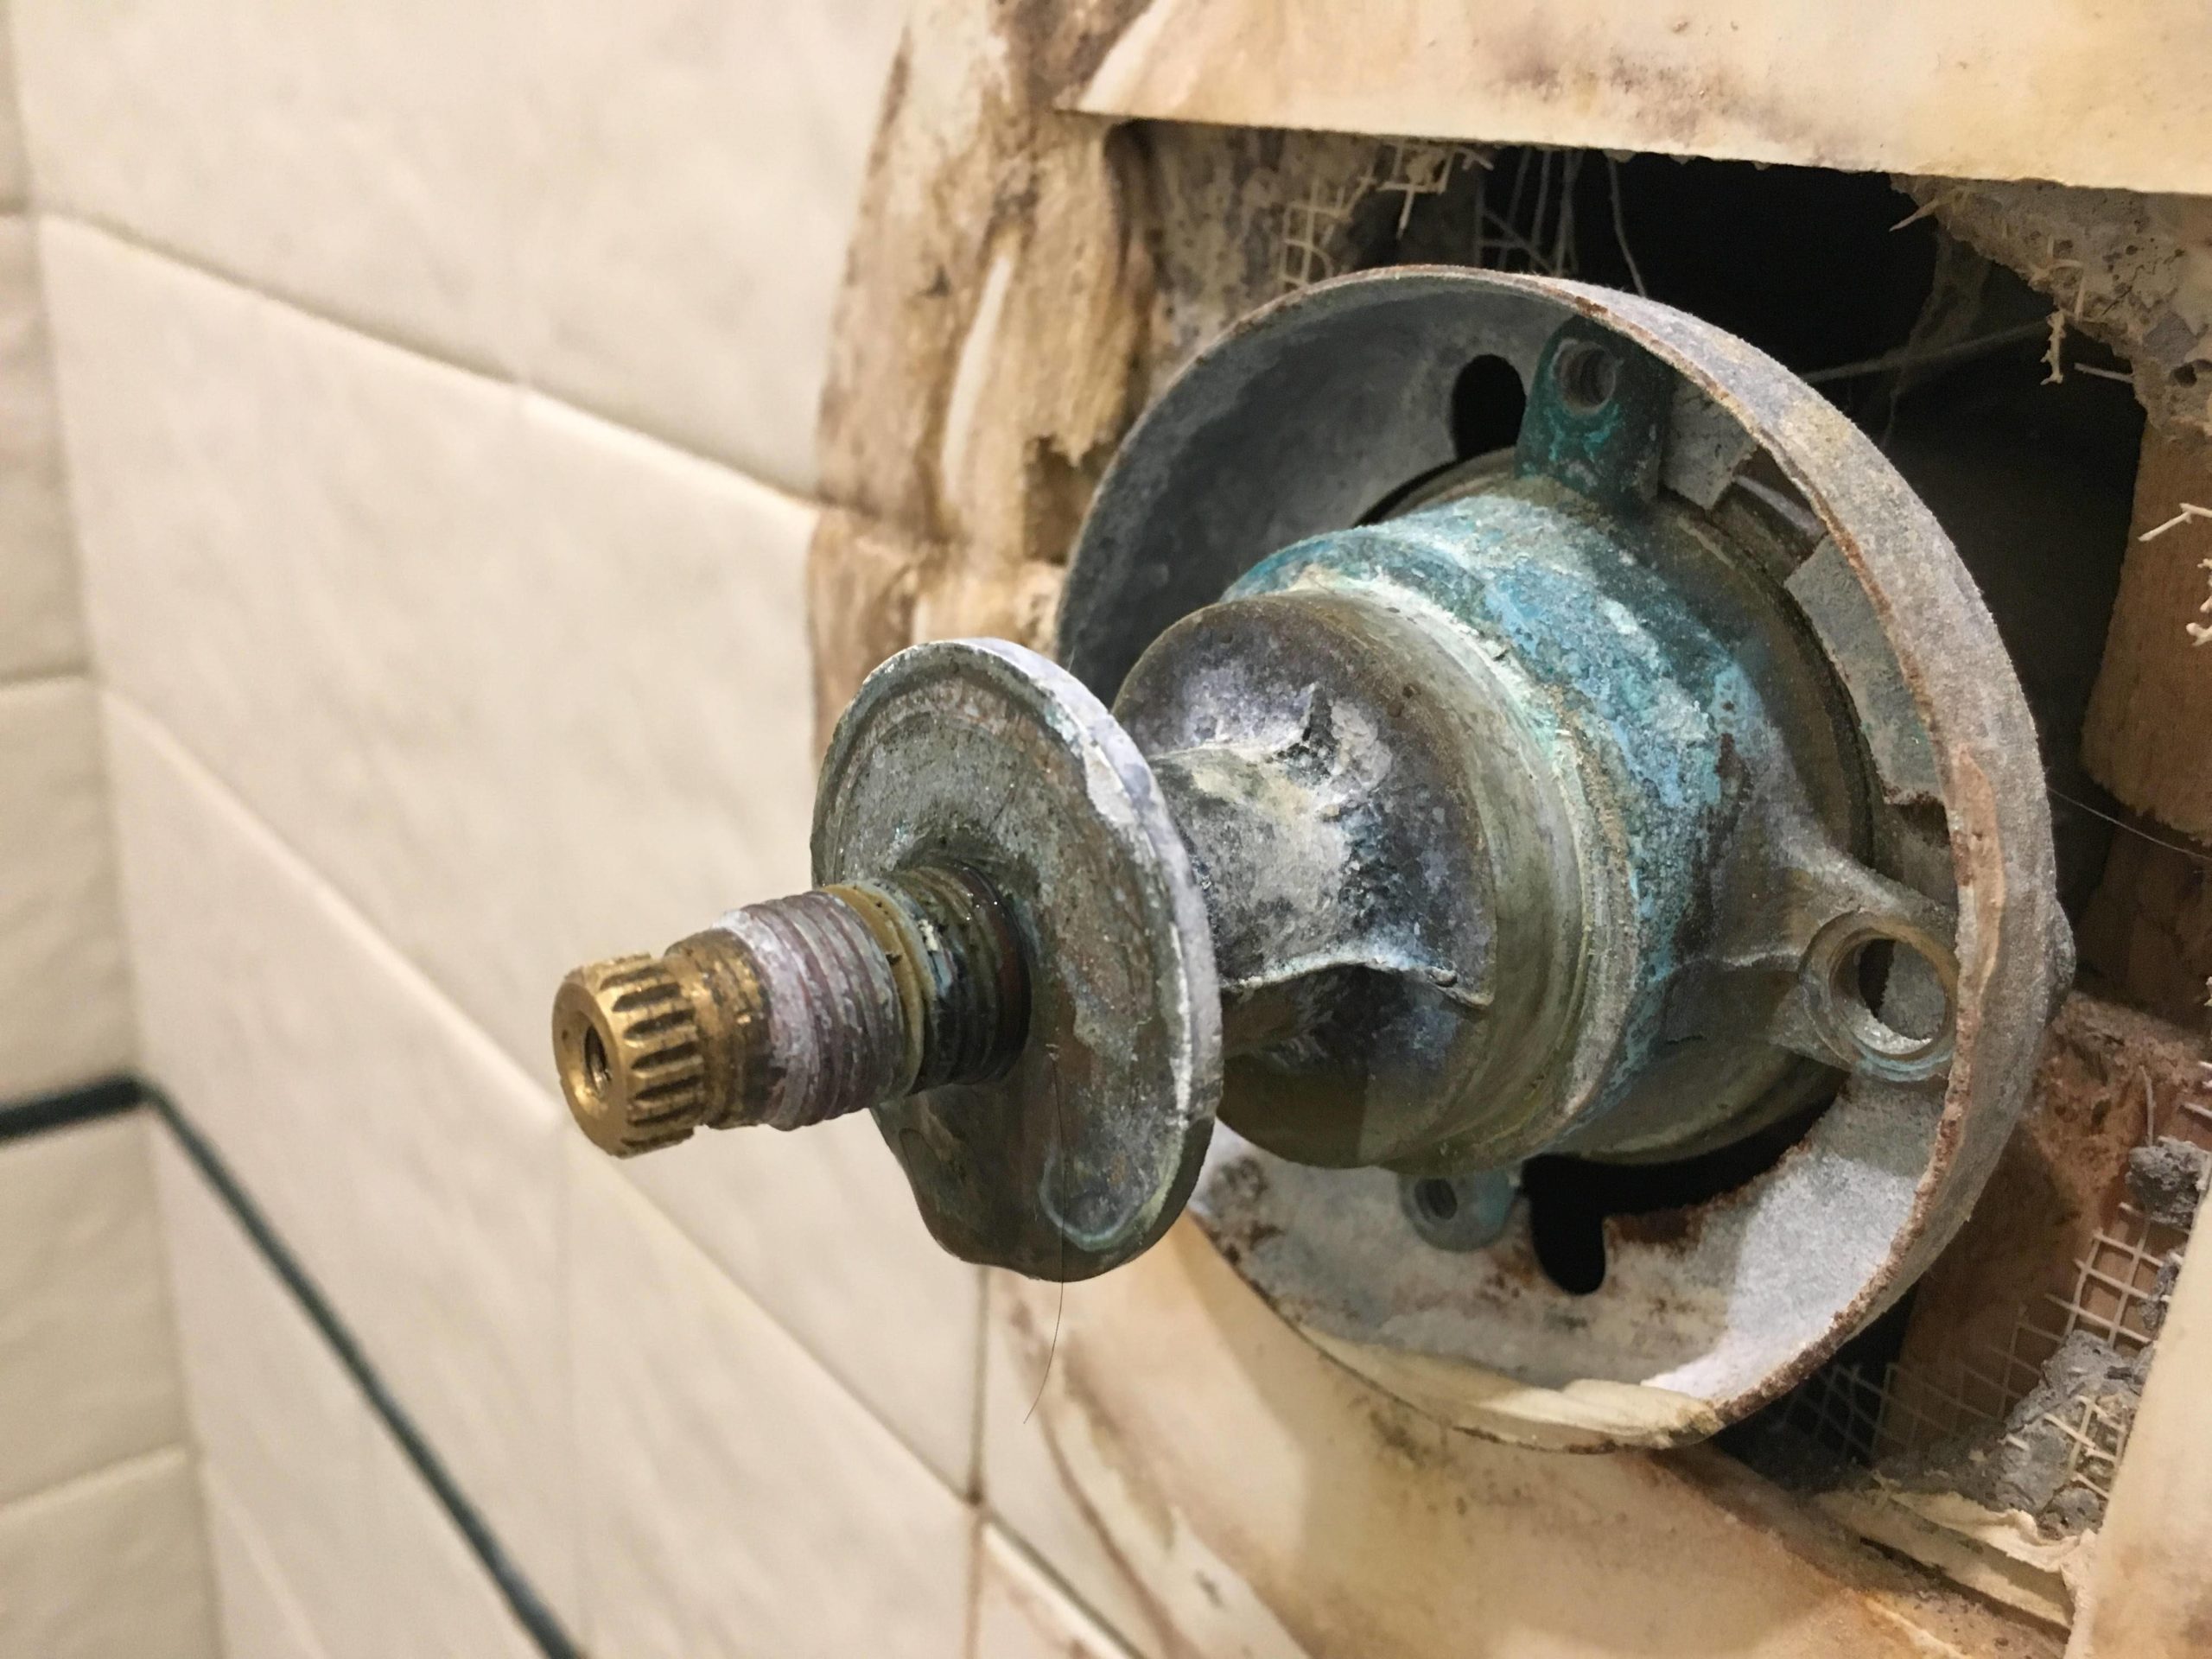 Can you replace shower cartridge without turning off water?